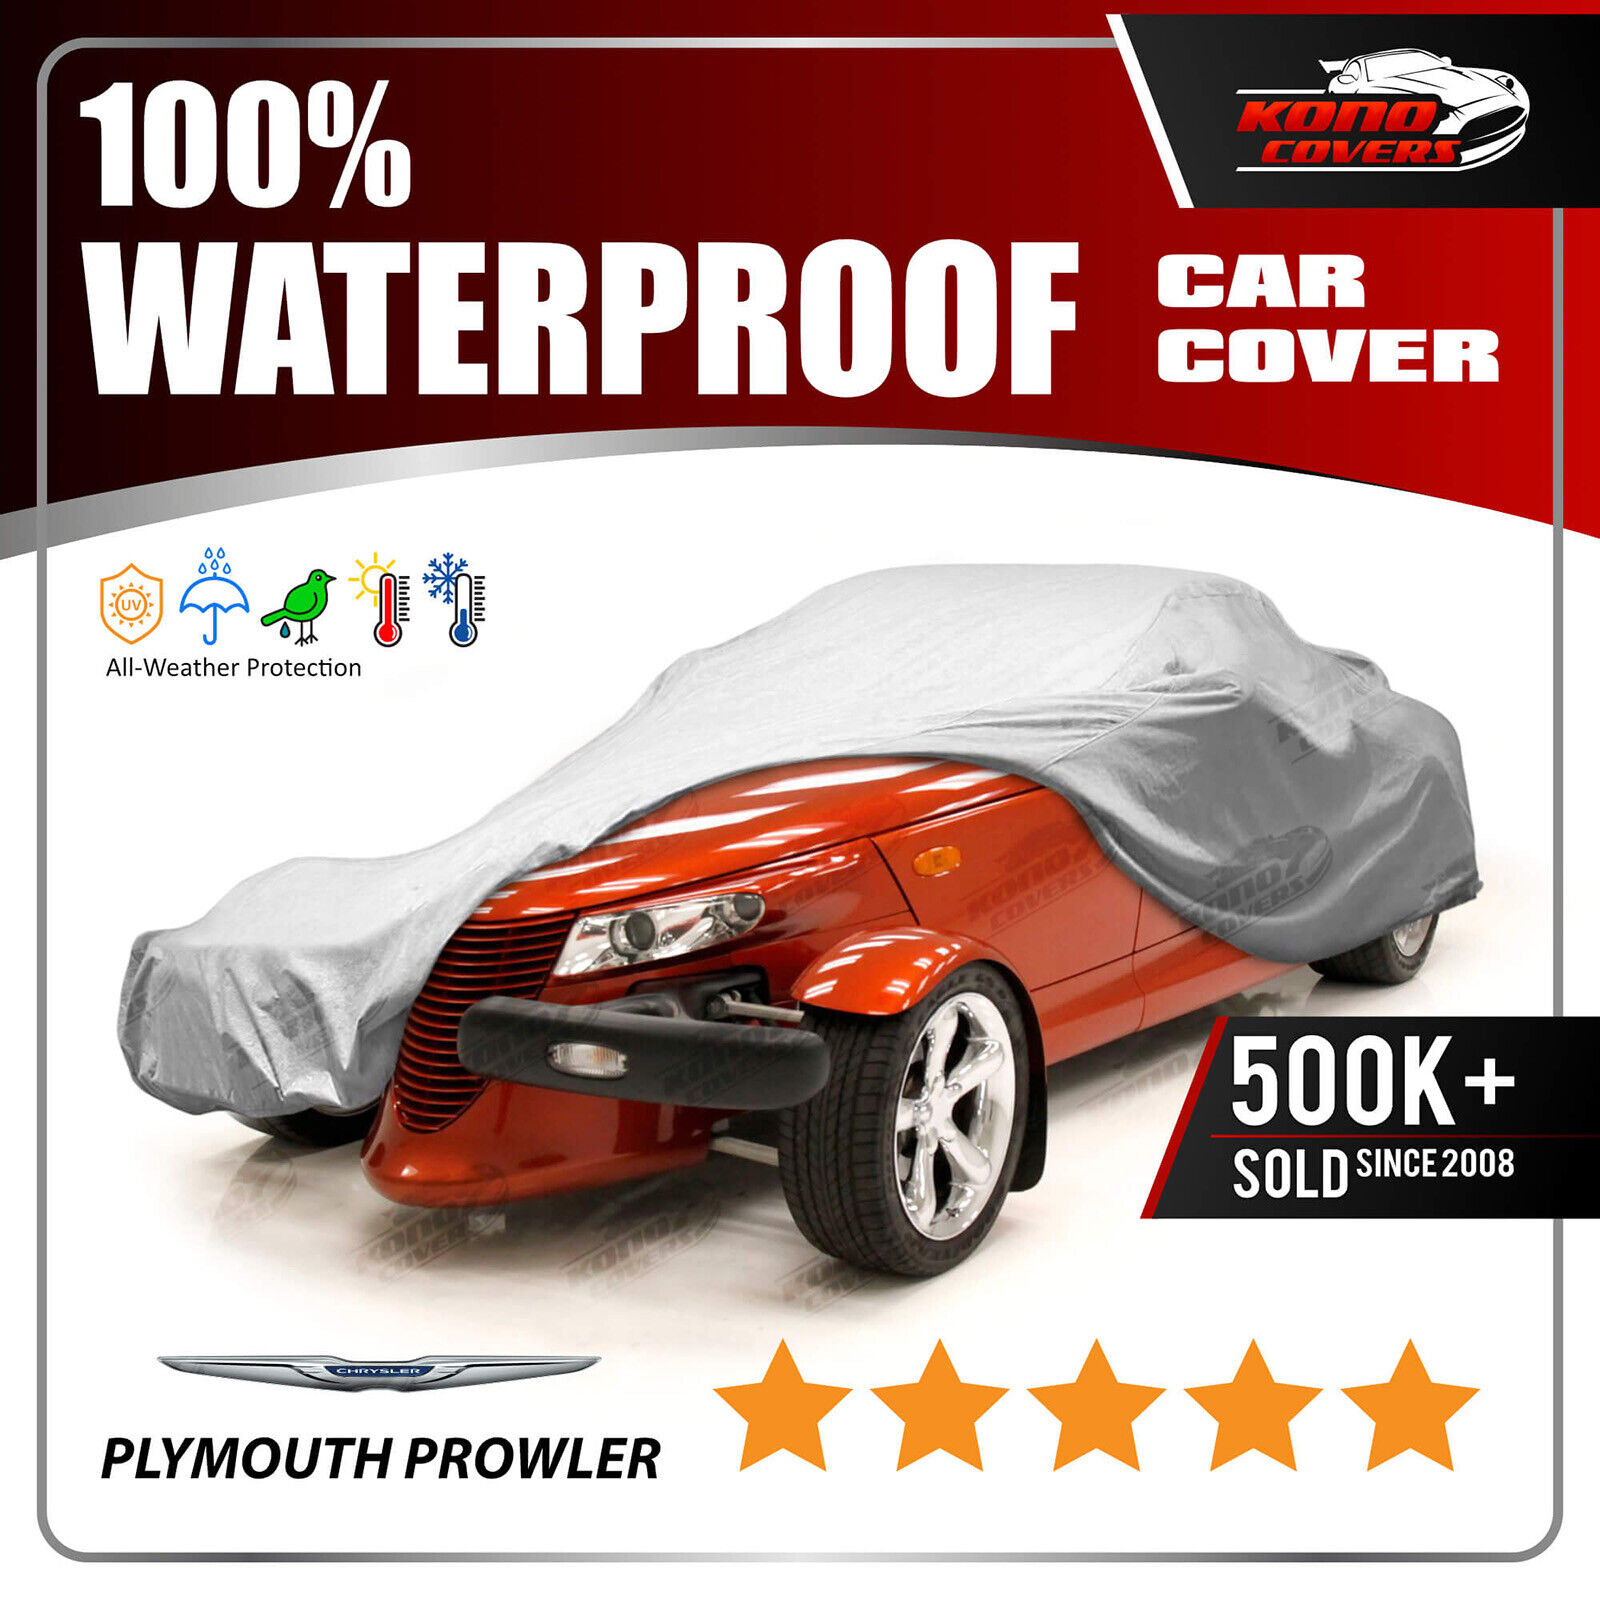 Fits CHRYSLER PLYMOUTH PROWLER 1997-2002 CAR COVER - 100% Waterproof Breathable